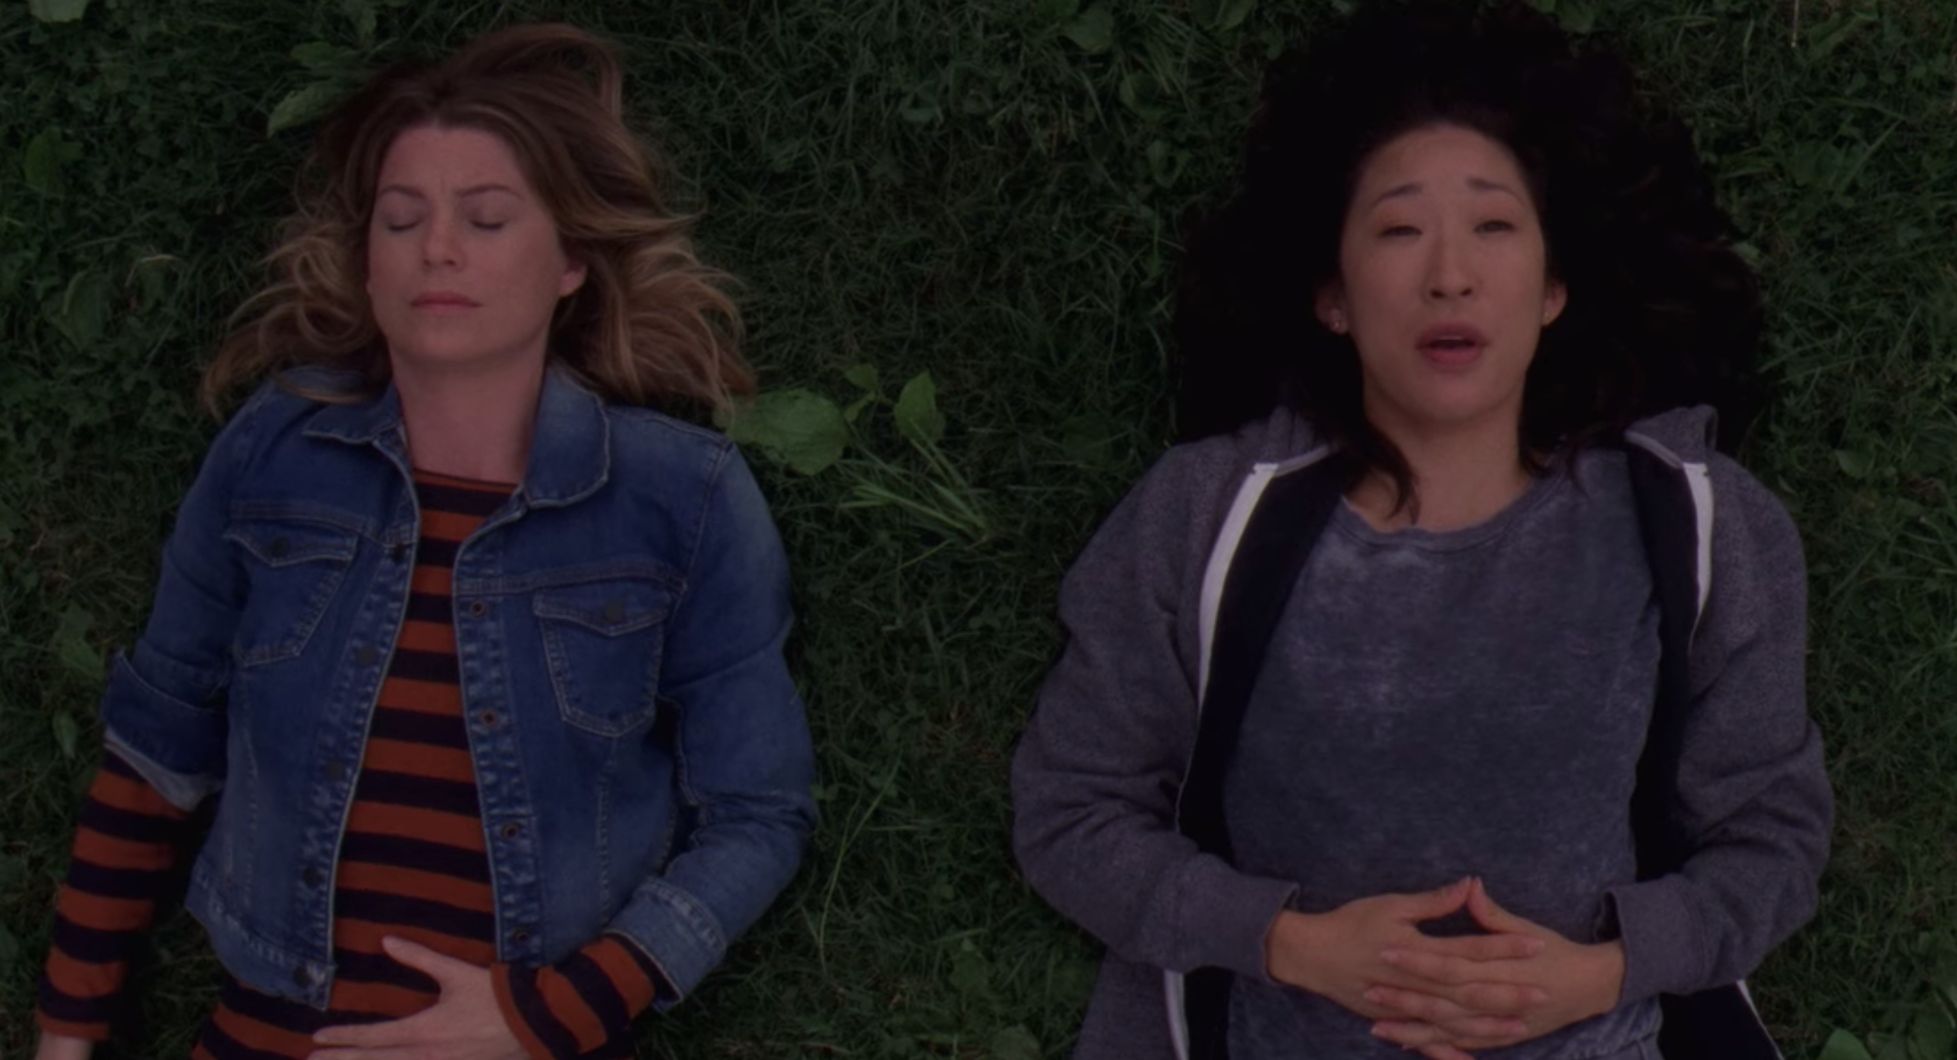 Meredith Grey, with her eyes closed and wearing a red-and-black striped shirt under a denim jacket, lies on the grass next to Cristina Yang, wearing a gray shirt under a matching sweater